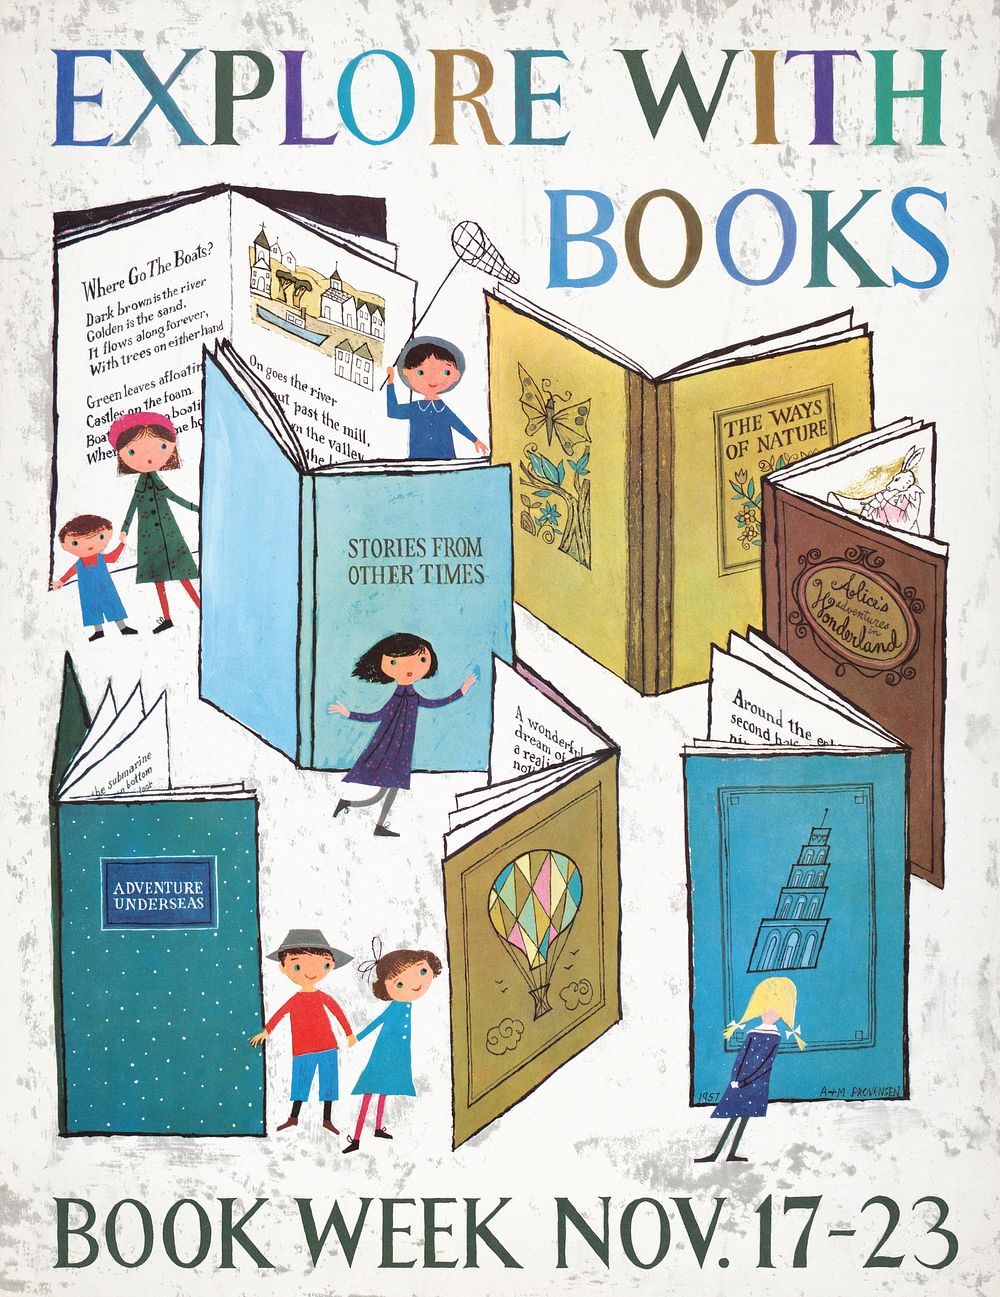 Explore with books. Book week, Nov. 17-23 (1957) vintage poster by Alice Provensen. Original public domain image from the…